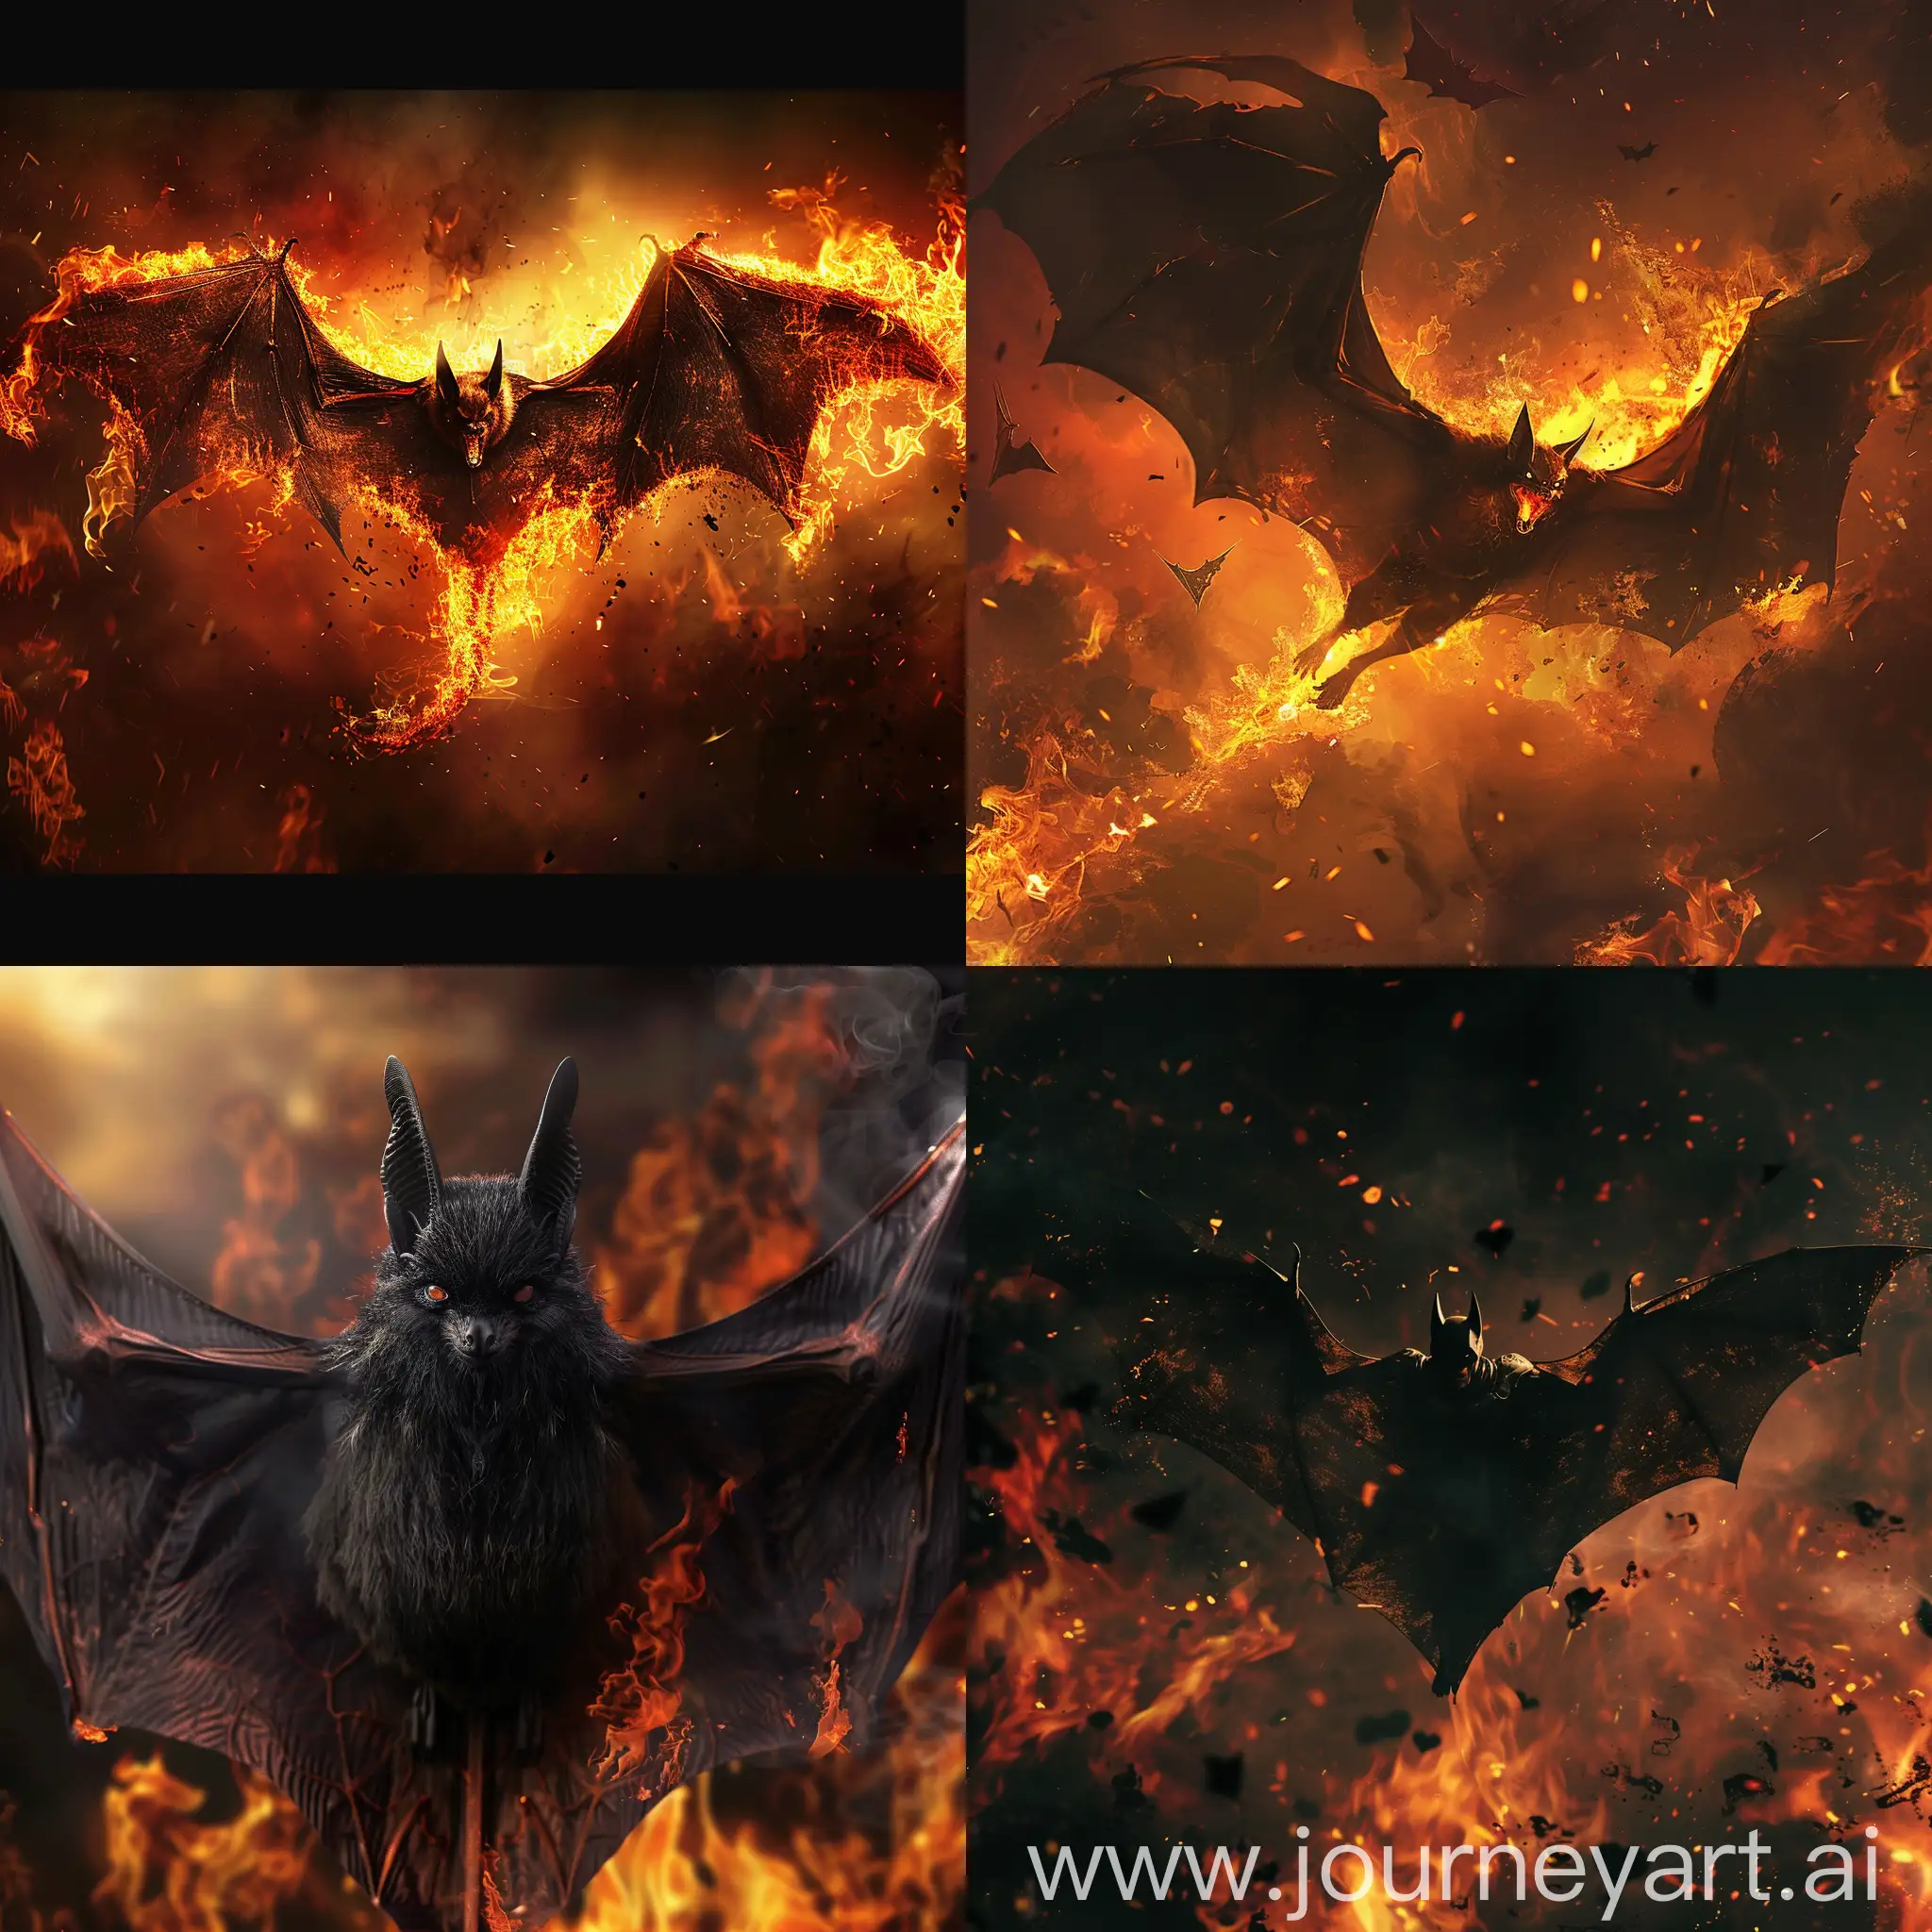 an image like a bat in a fire party, but show me only the wings